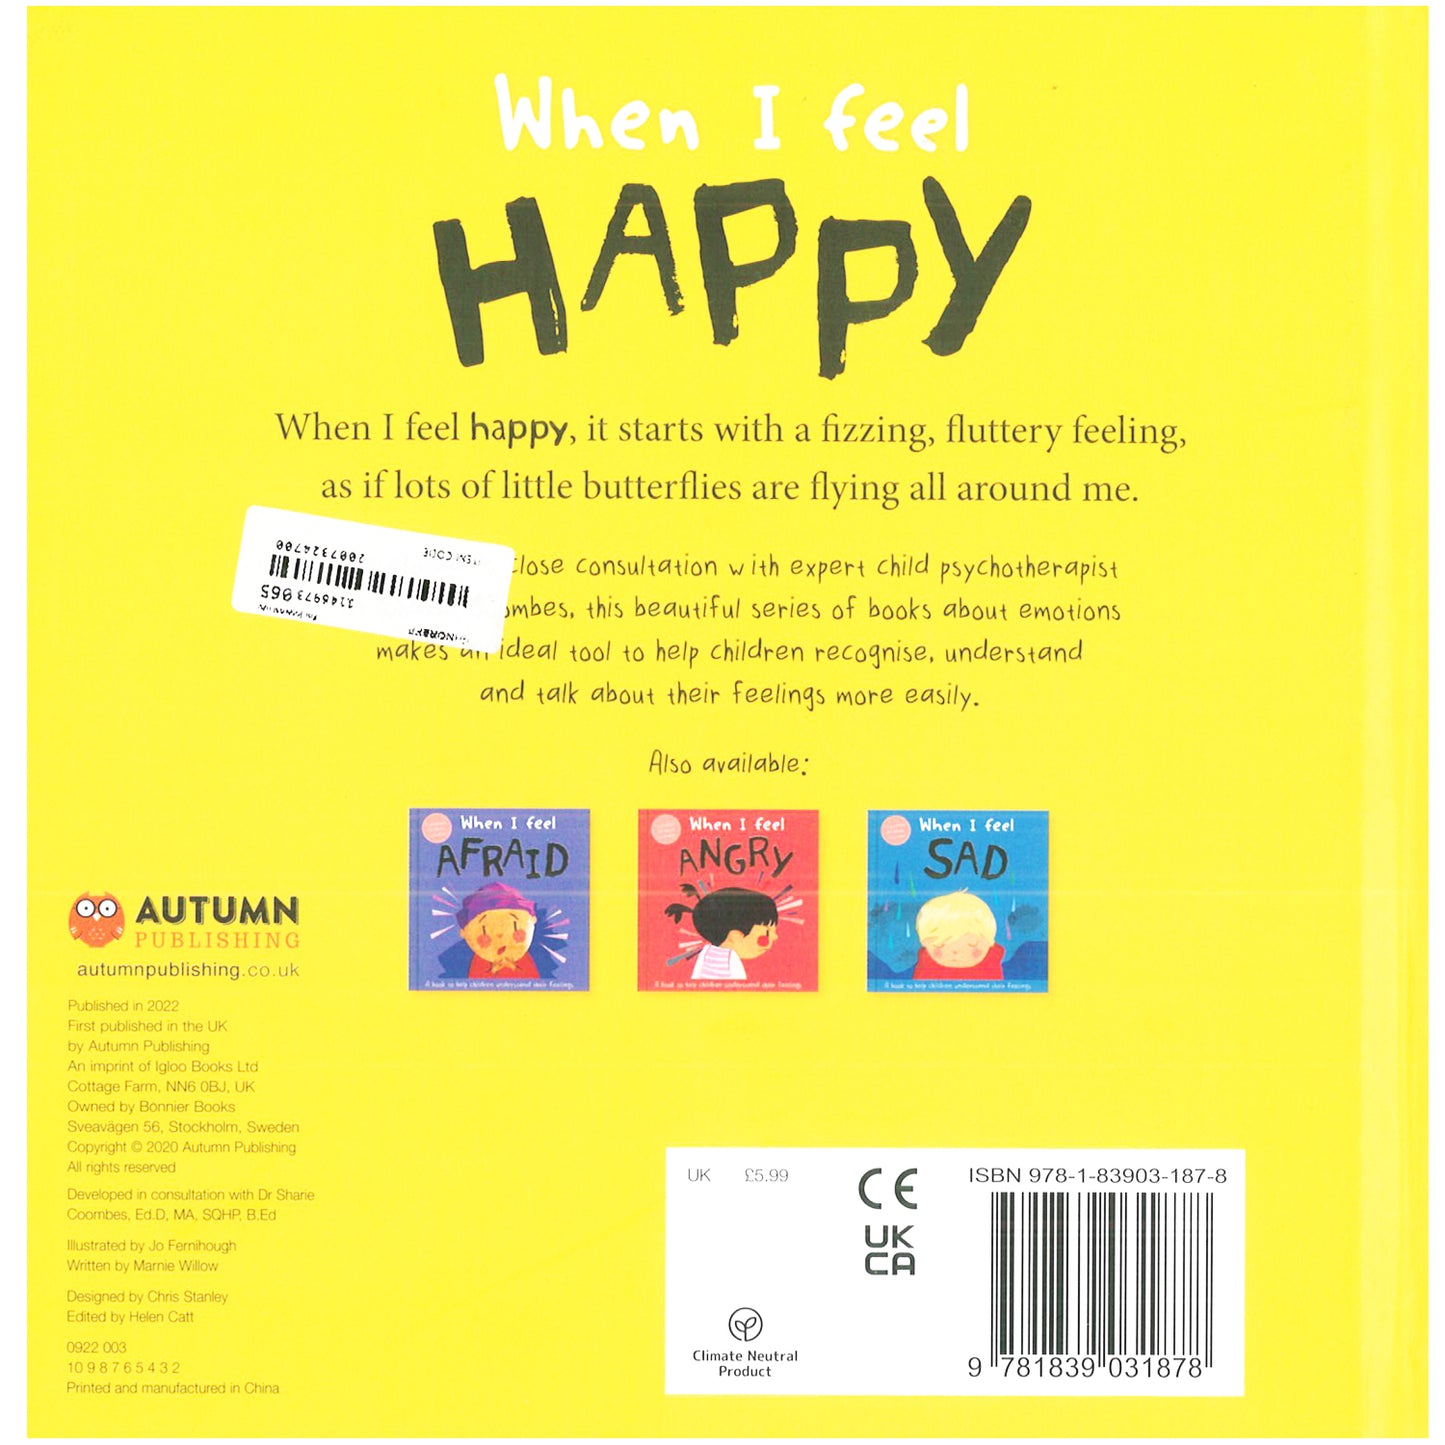 When I Feel Happy (A Children's Book about Emotions) [Hardcover] Coombes, Dr Sharie